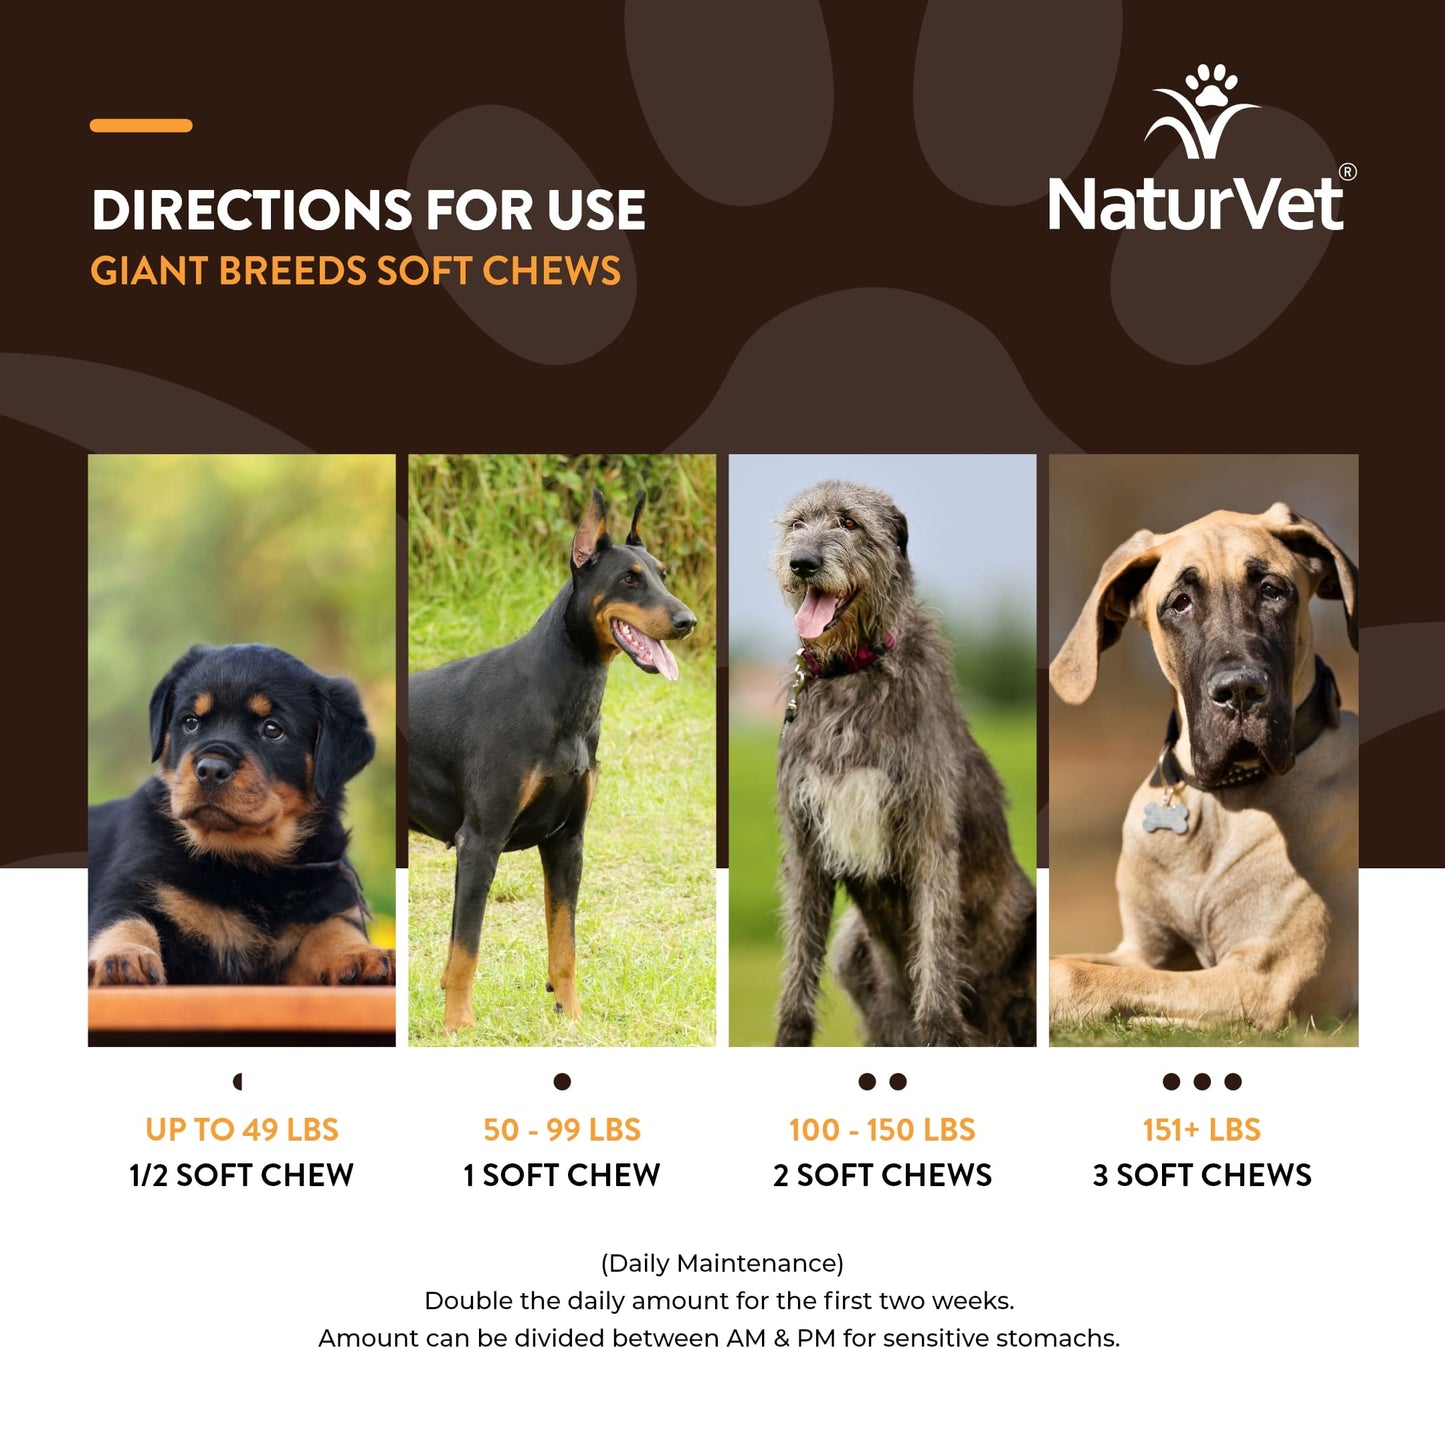 NaturVet Breed Specific Giant Breed Dogs